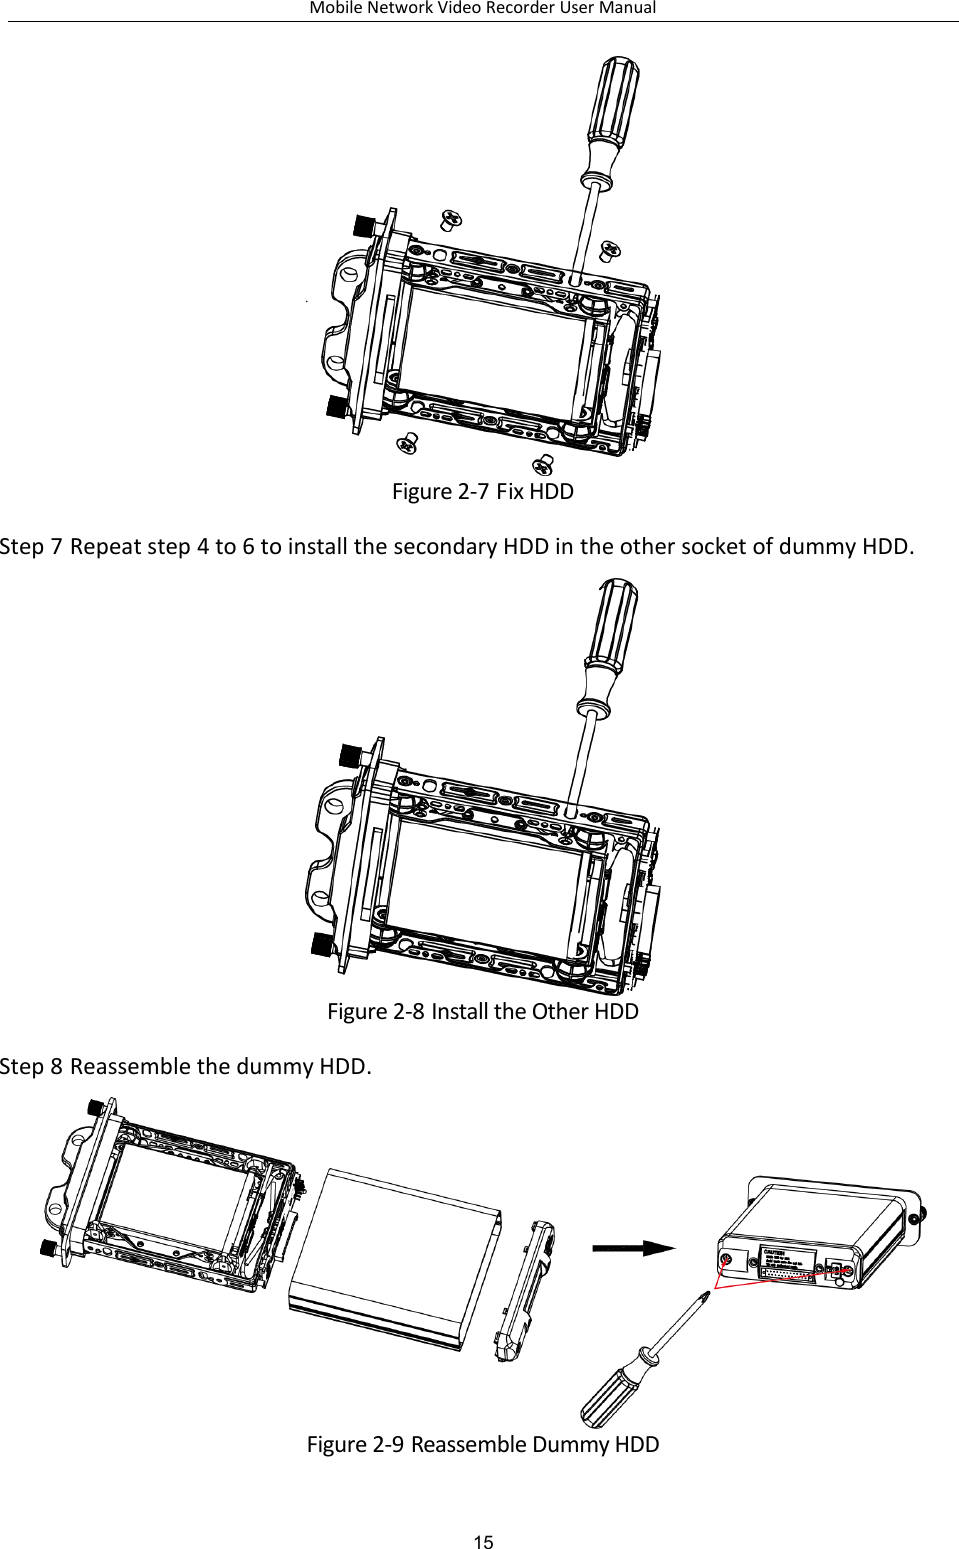 Mobile Network Video Recorder User Manual 15  Figure 2-7 Fix HDD Step 7 Repeat step 4 to 6 to install the secondary HDD in the other socket of dummy HDD.  Figure 2-8 Install the Other HDD Step 8 Reassemble the dummy HDD.  Figure 2-9 Reassemble Dummy HDD 